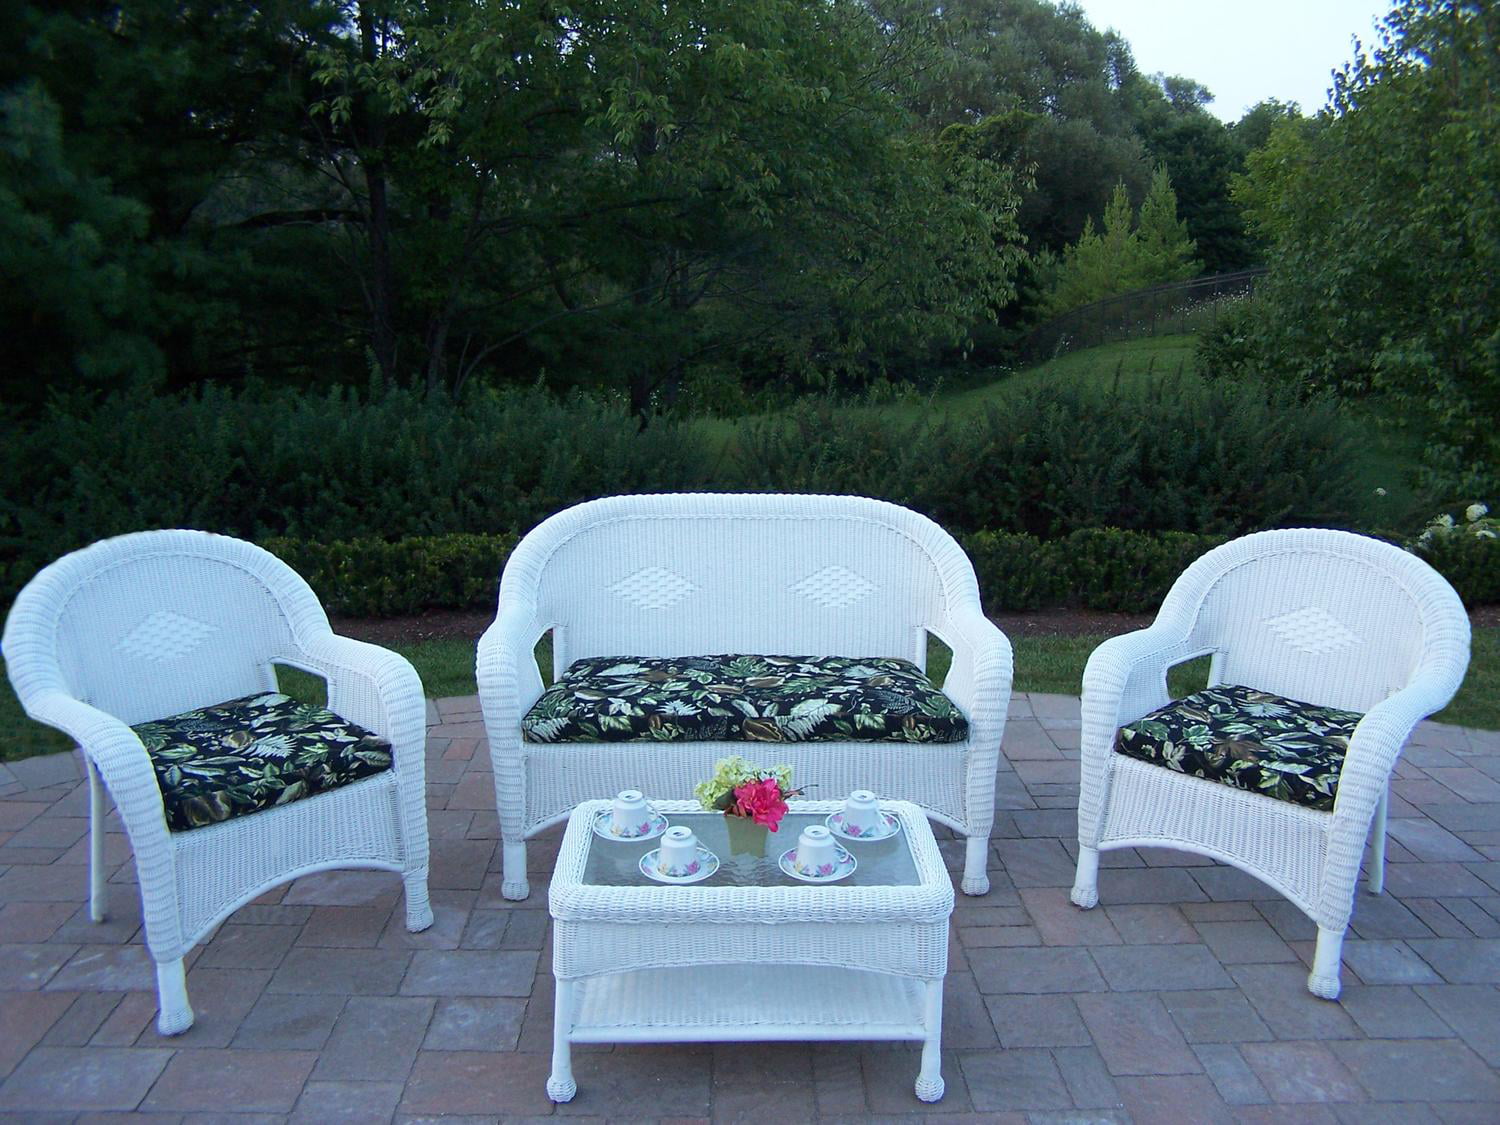 53.5" 4 pc. white outdoor wicker loveseat, chairs and coffee table set